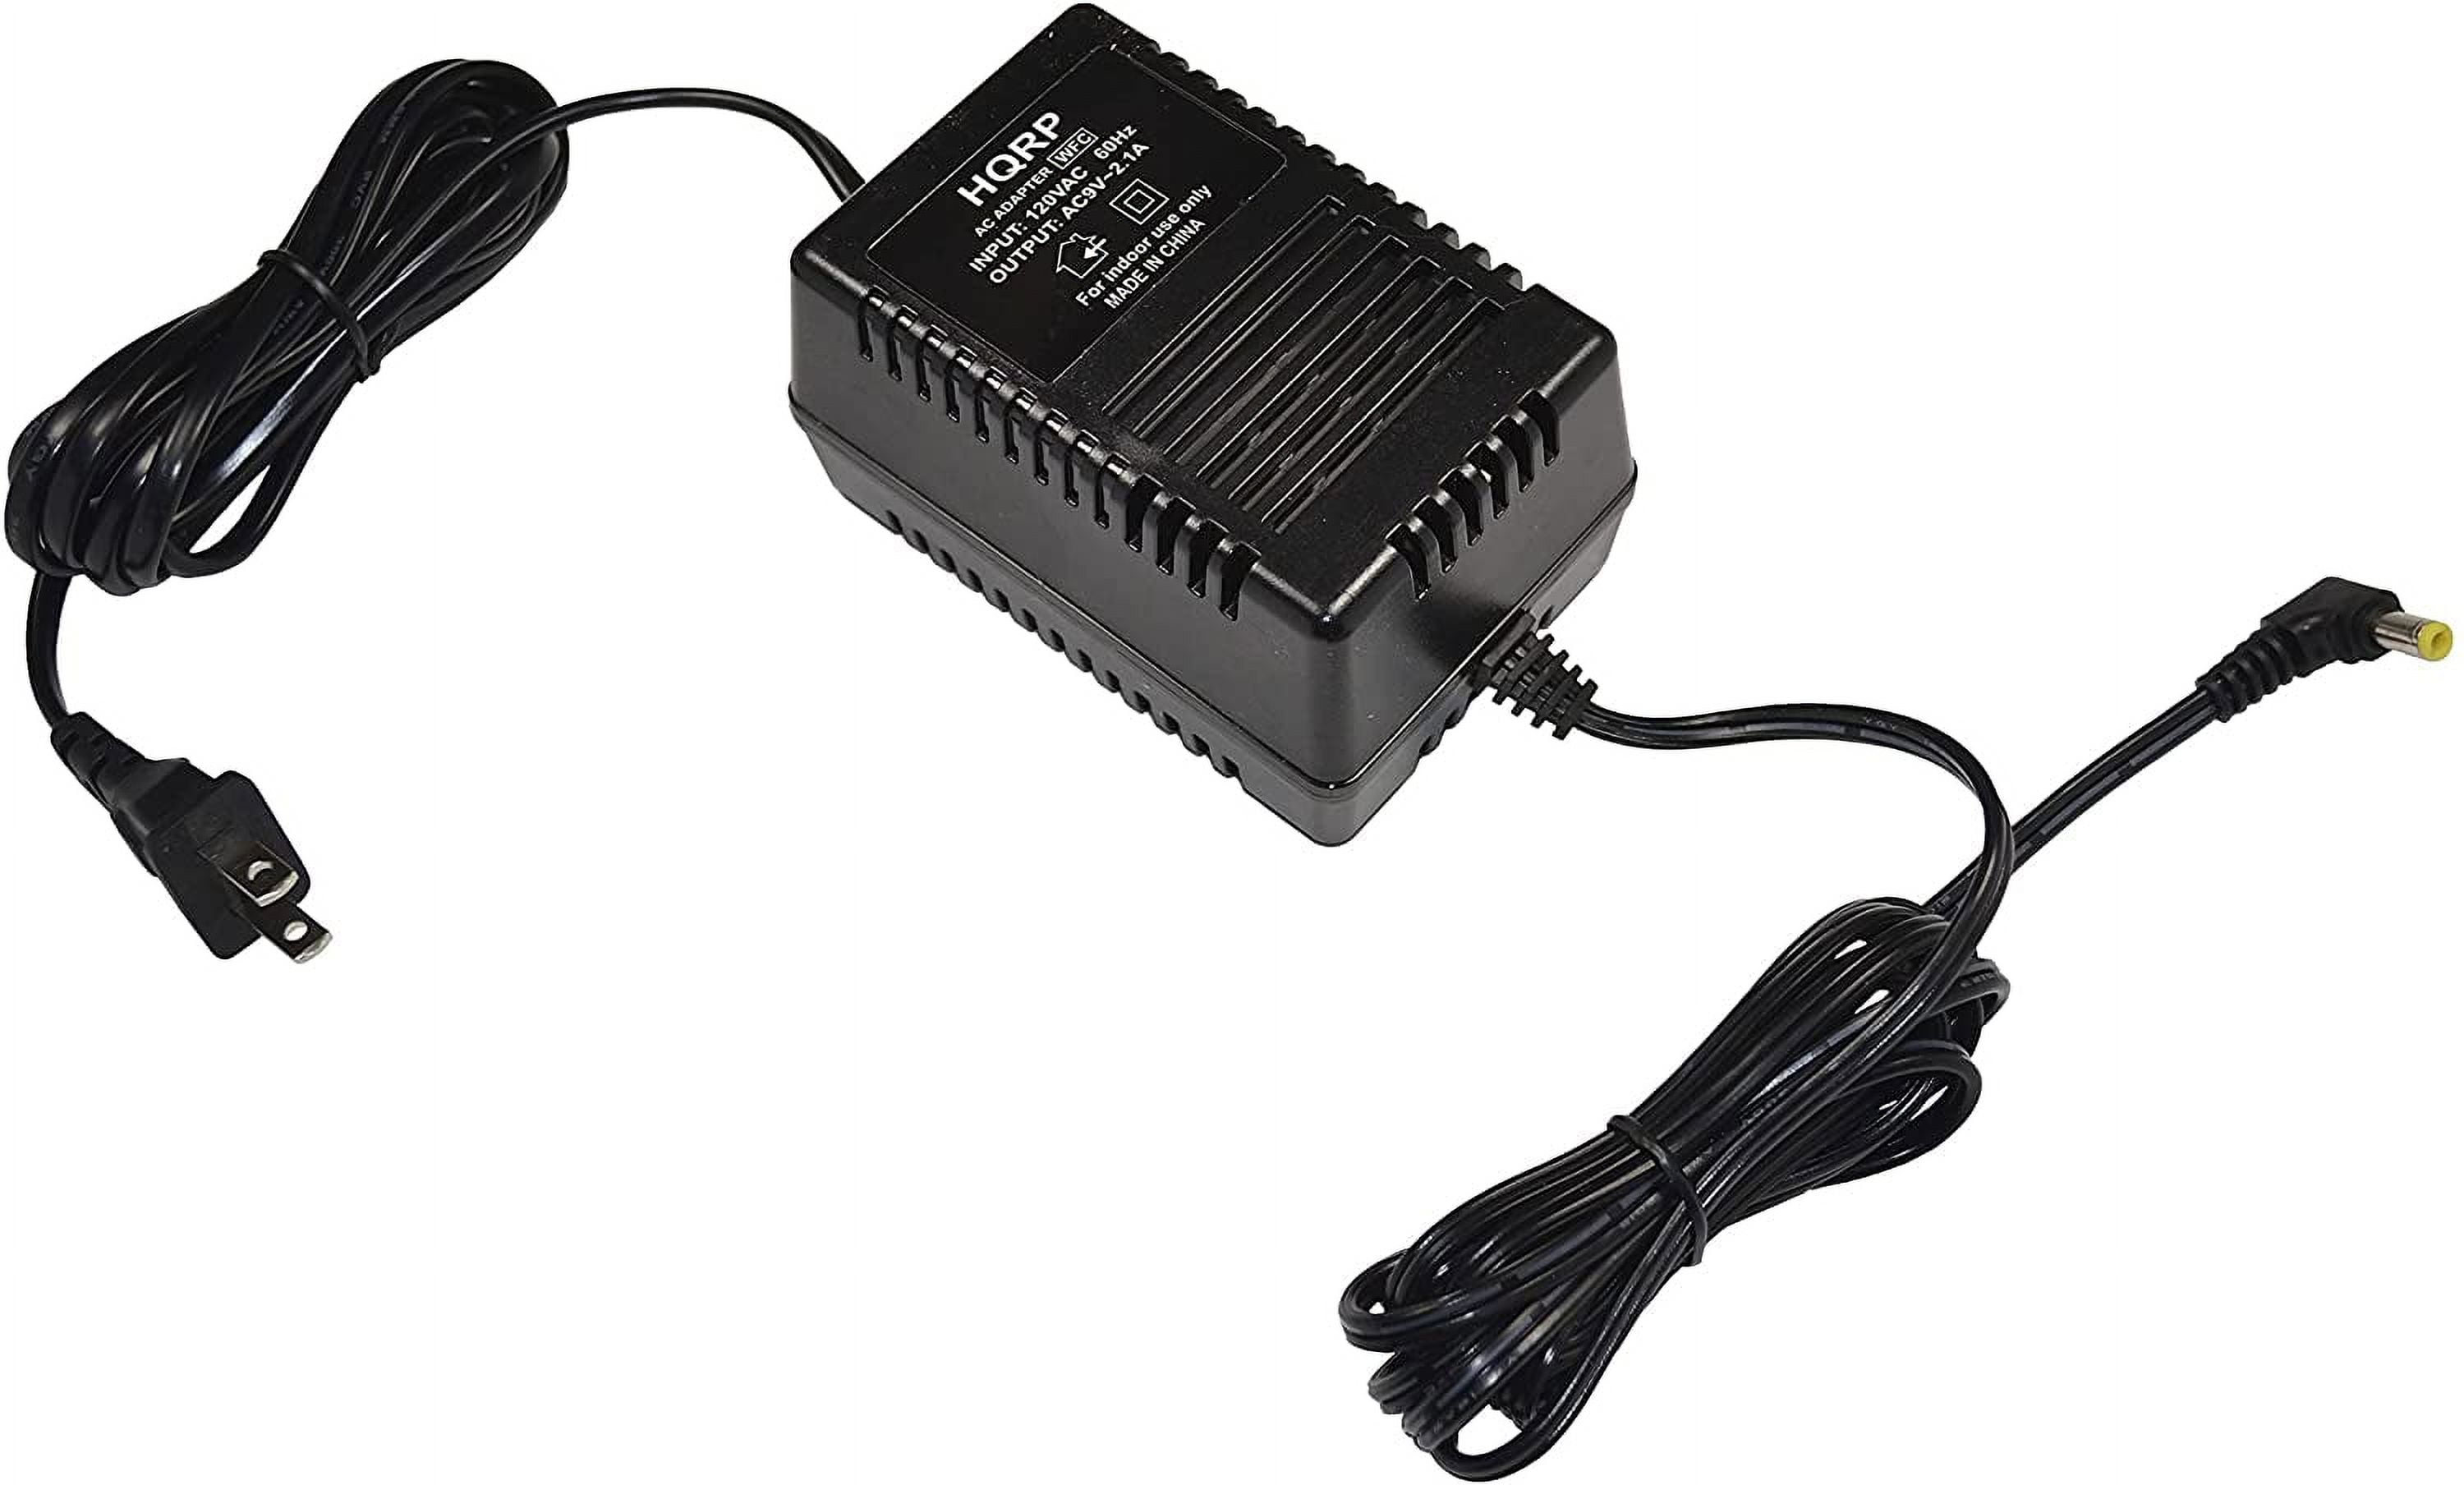 Omilik AC Adapter compatible with Delphi XM Roady 2 SA10085-11P1 LC 0705- 0079 Receiver Power Supply 